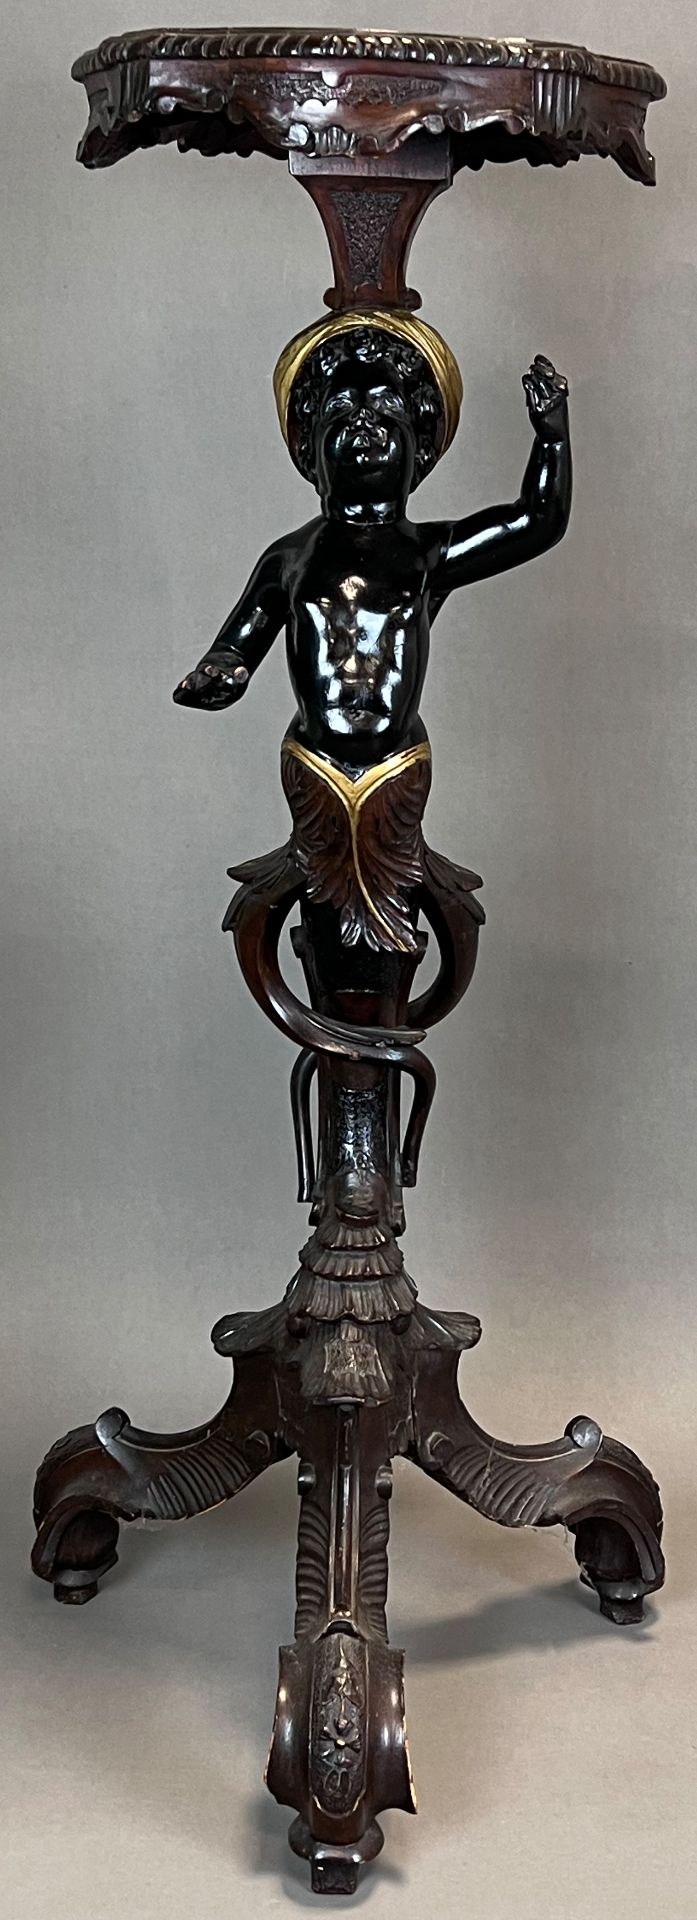 Blackamoor torch stand. Wood. Late 19th century.